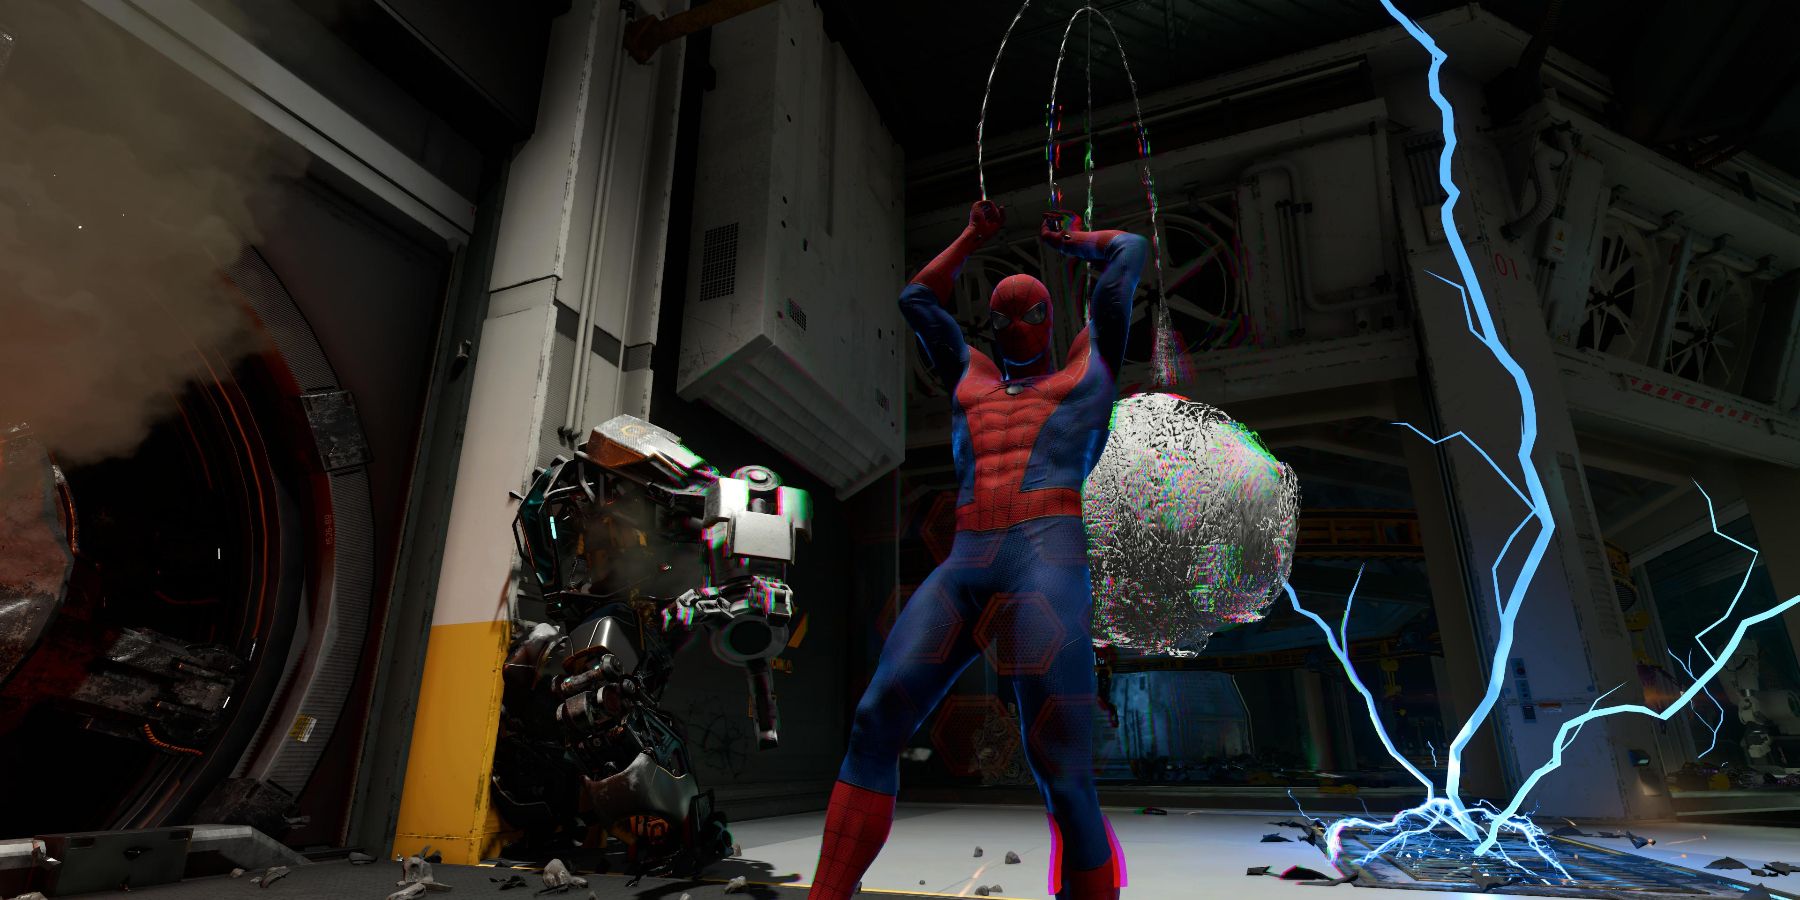 Spider-Man hurling his Wrecking Ball ultimate ability in Marvel's Avengers